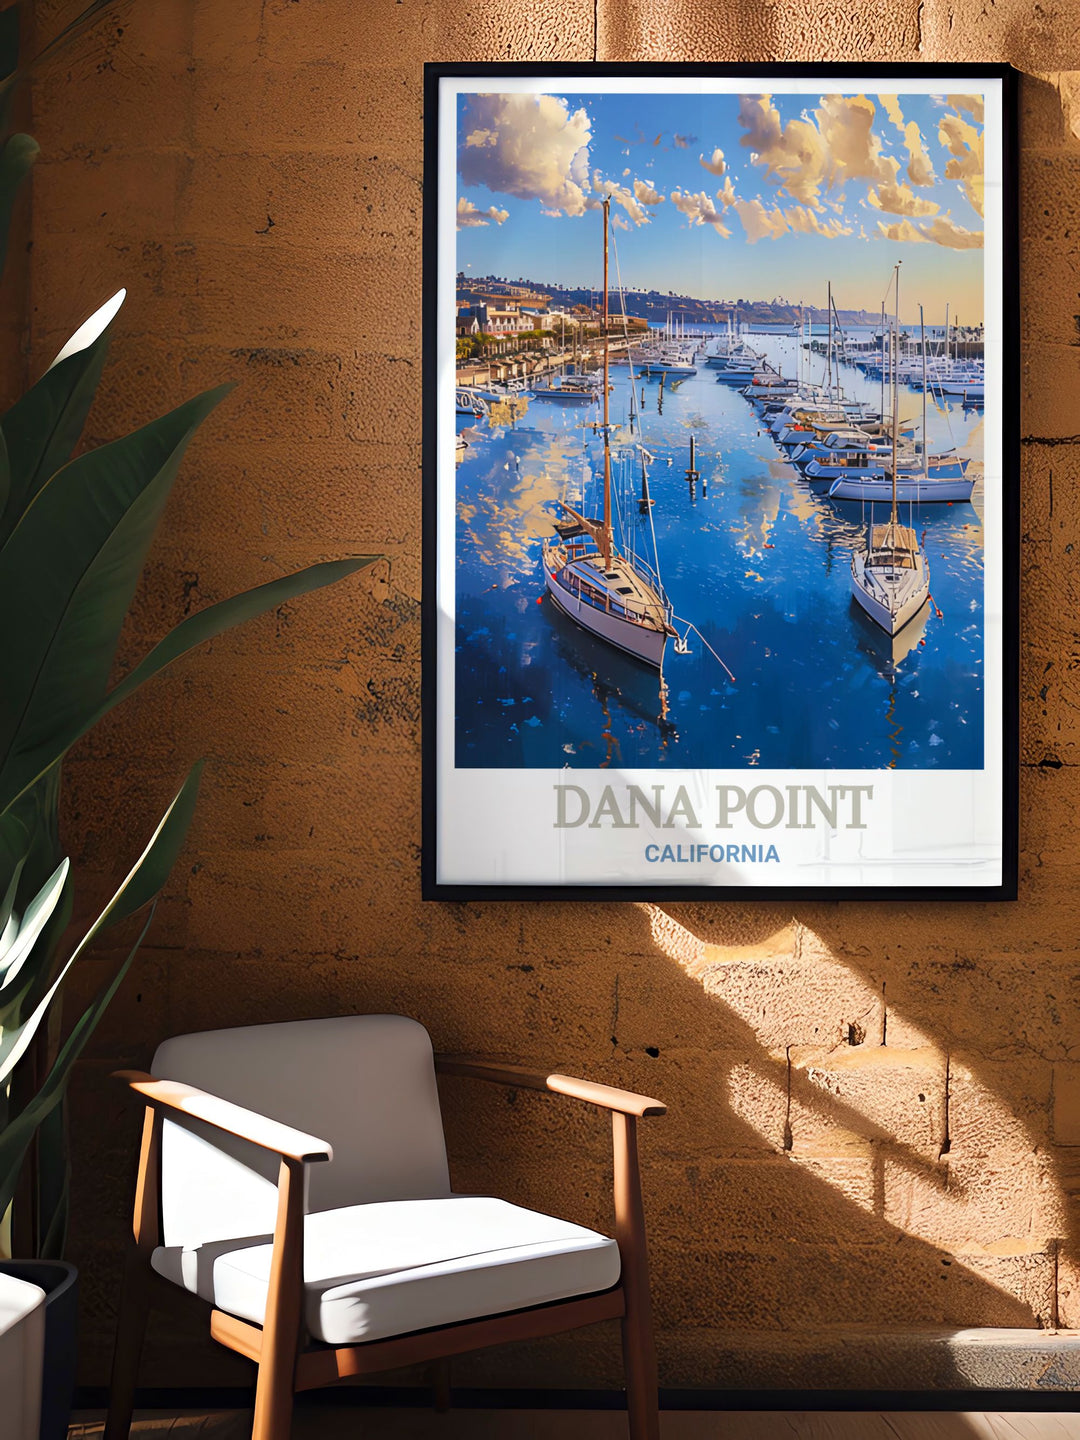 Dana Point Harbor artwork is perfect for those who appreciate the natural beauty of California. This travel poster highlights the stunning landscapes of Dana Point Harbor making it a great addition to any home decor collection.